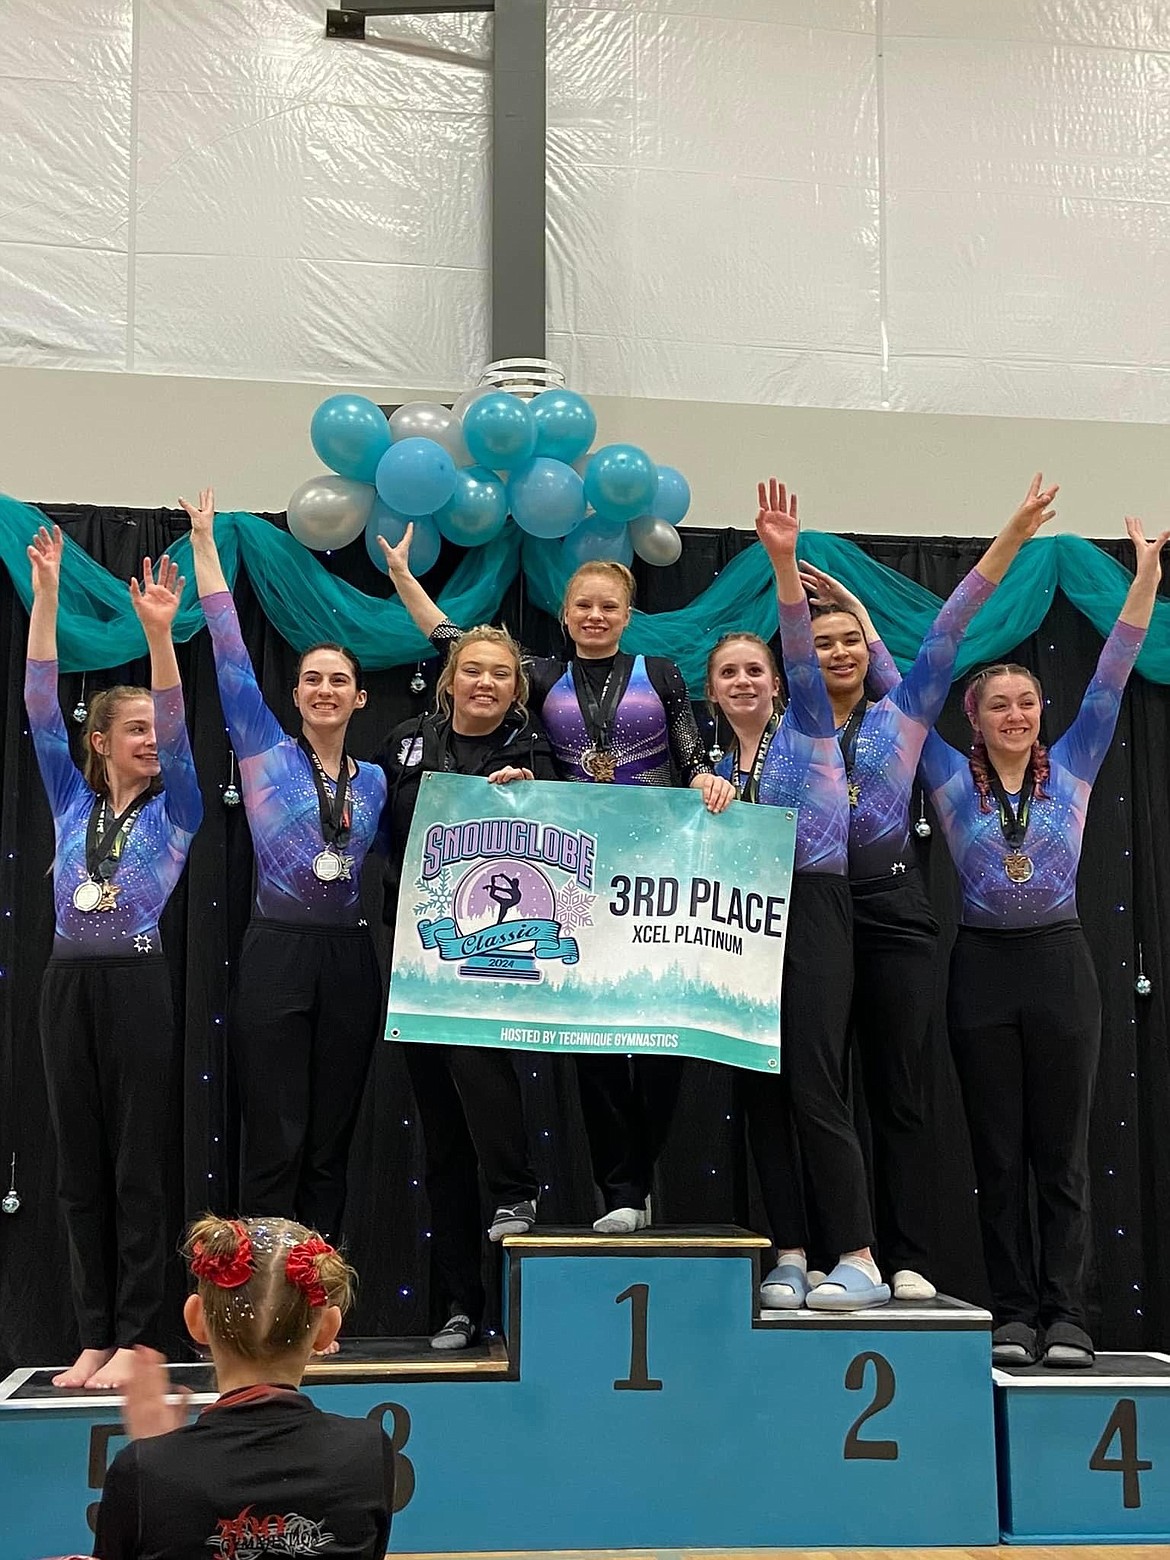 Courtesy photo
GEMS Athletic Center Platinum Team won 3rd Place team at the Snowglobe Classic in Post Falls on March 8-10. From left are Saydee Mathews, Ariel Fahey, Riley Walton, Izzy McCaslin, Macee Caudle, Shariece Vandever, and Laina Busicchia.